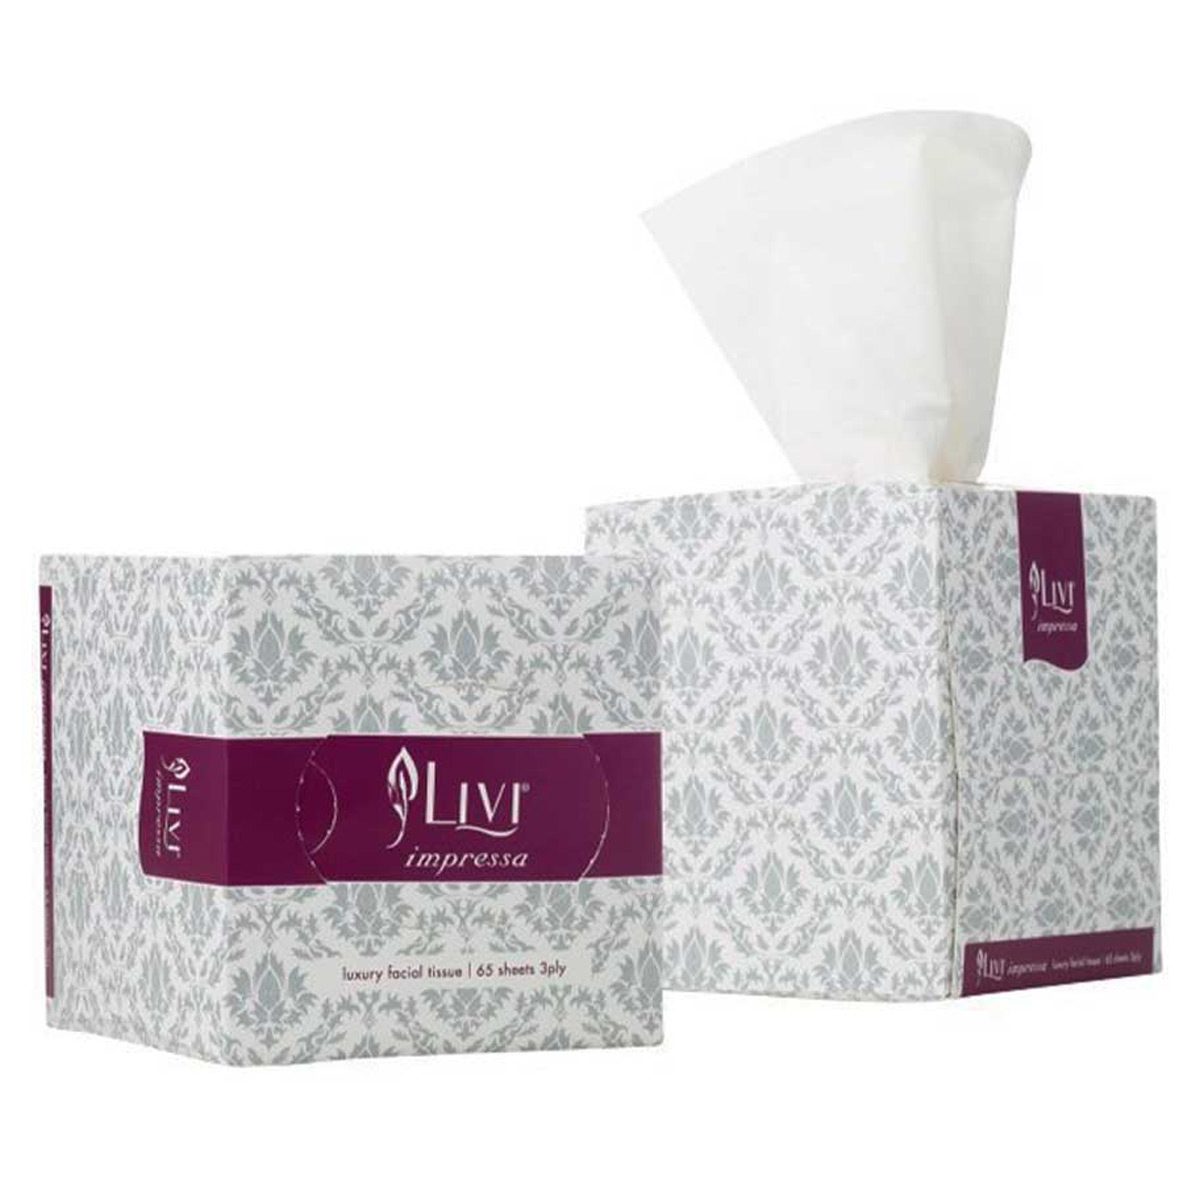 paper-products-facial-tissues-livi-impressa-cube-3-ply-facial-tissue-65-sheets-x-24-rolls-super-soft-thick-luxurious-gentle-on-skin-hypoallergenic-stylish-cube-for-convenience-vjs-distributors-3301